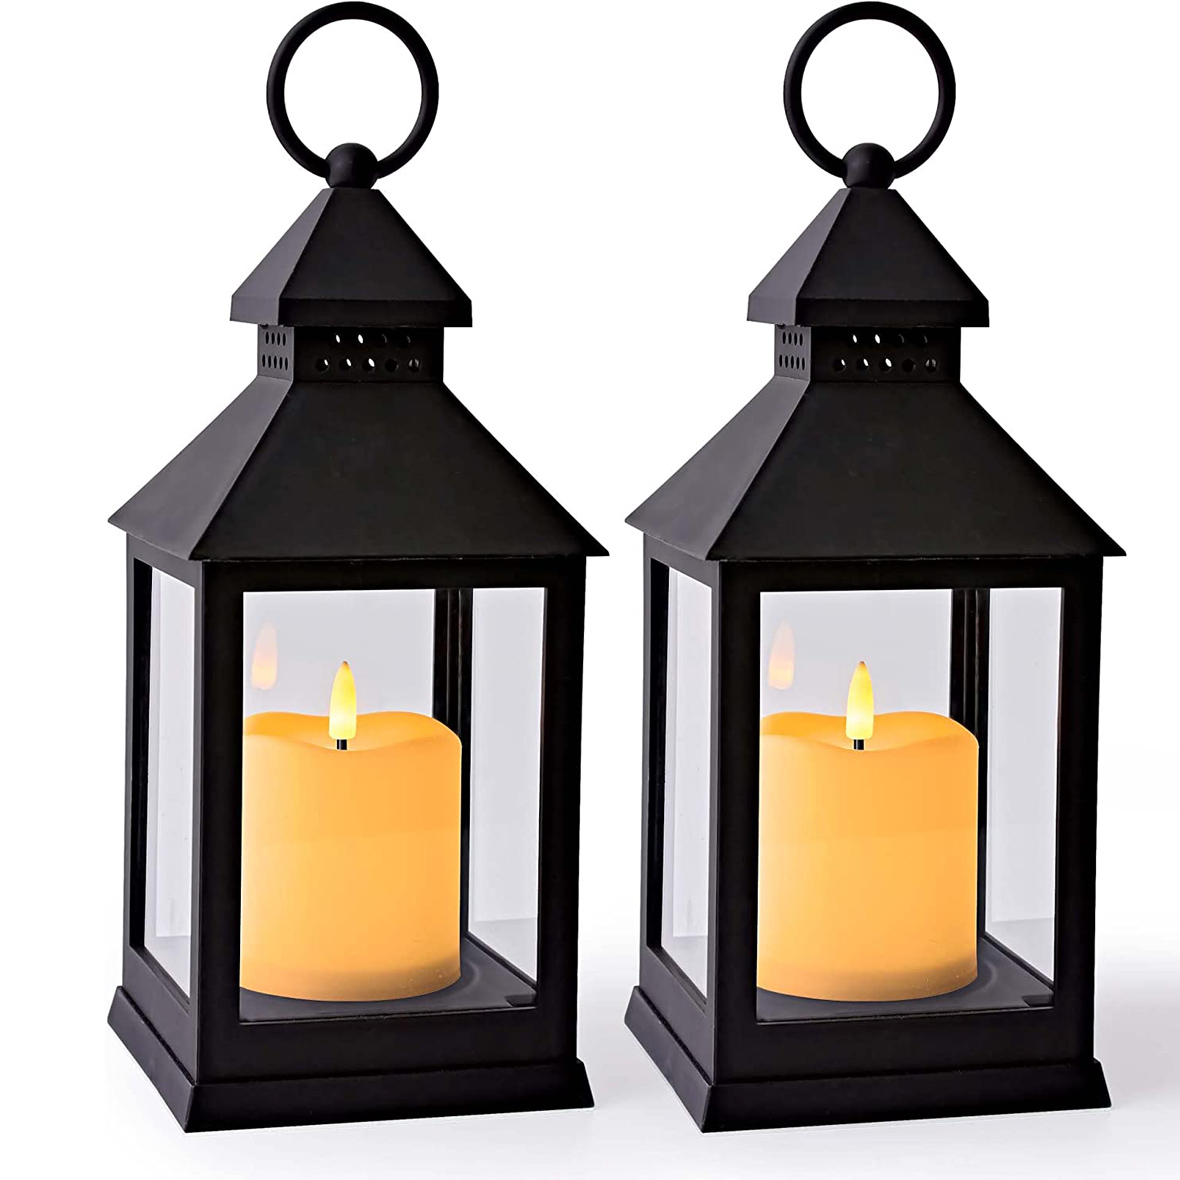 Yongmao Vintage Lantern Decorative LED Flickering Flameless Candle with Timer, Battery Powered LED Decorative Hanging Lanterns for Indoor Outdoor Garden Yard Home Decor(2 Pack)